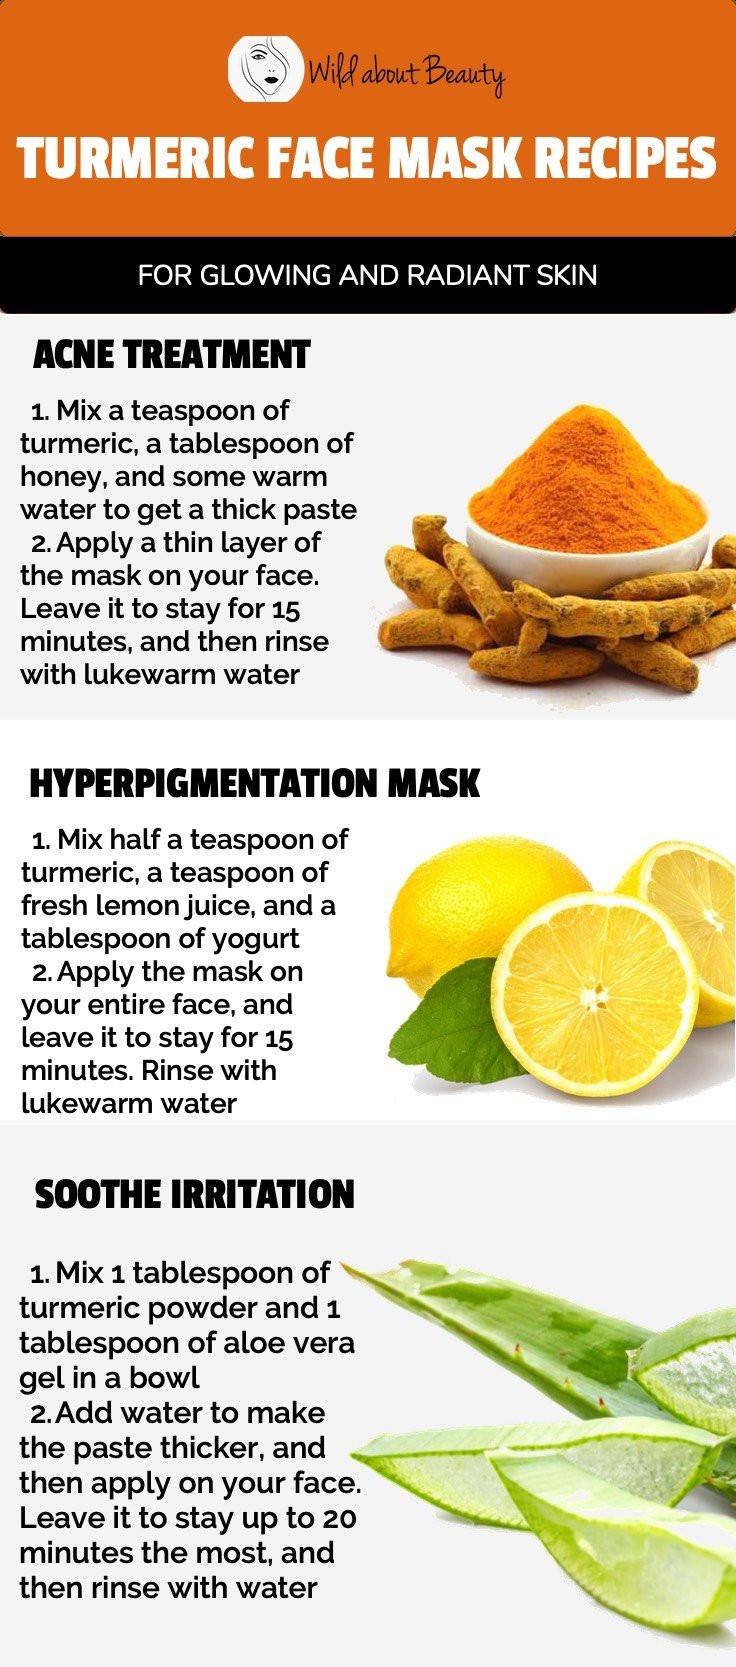 Turmeric Face Mask DIY
 Try These Turmeric Face Mask Recipes For Glowing and